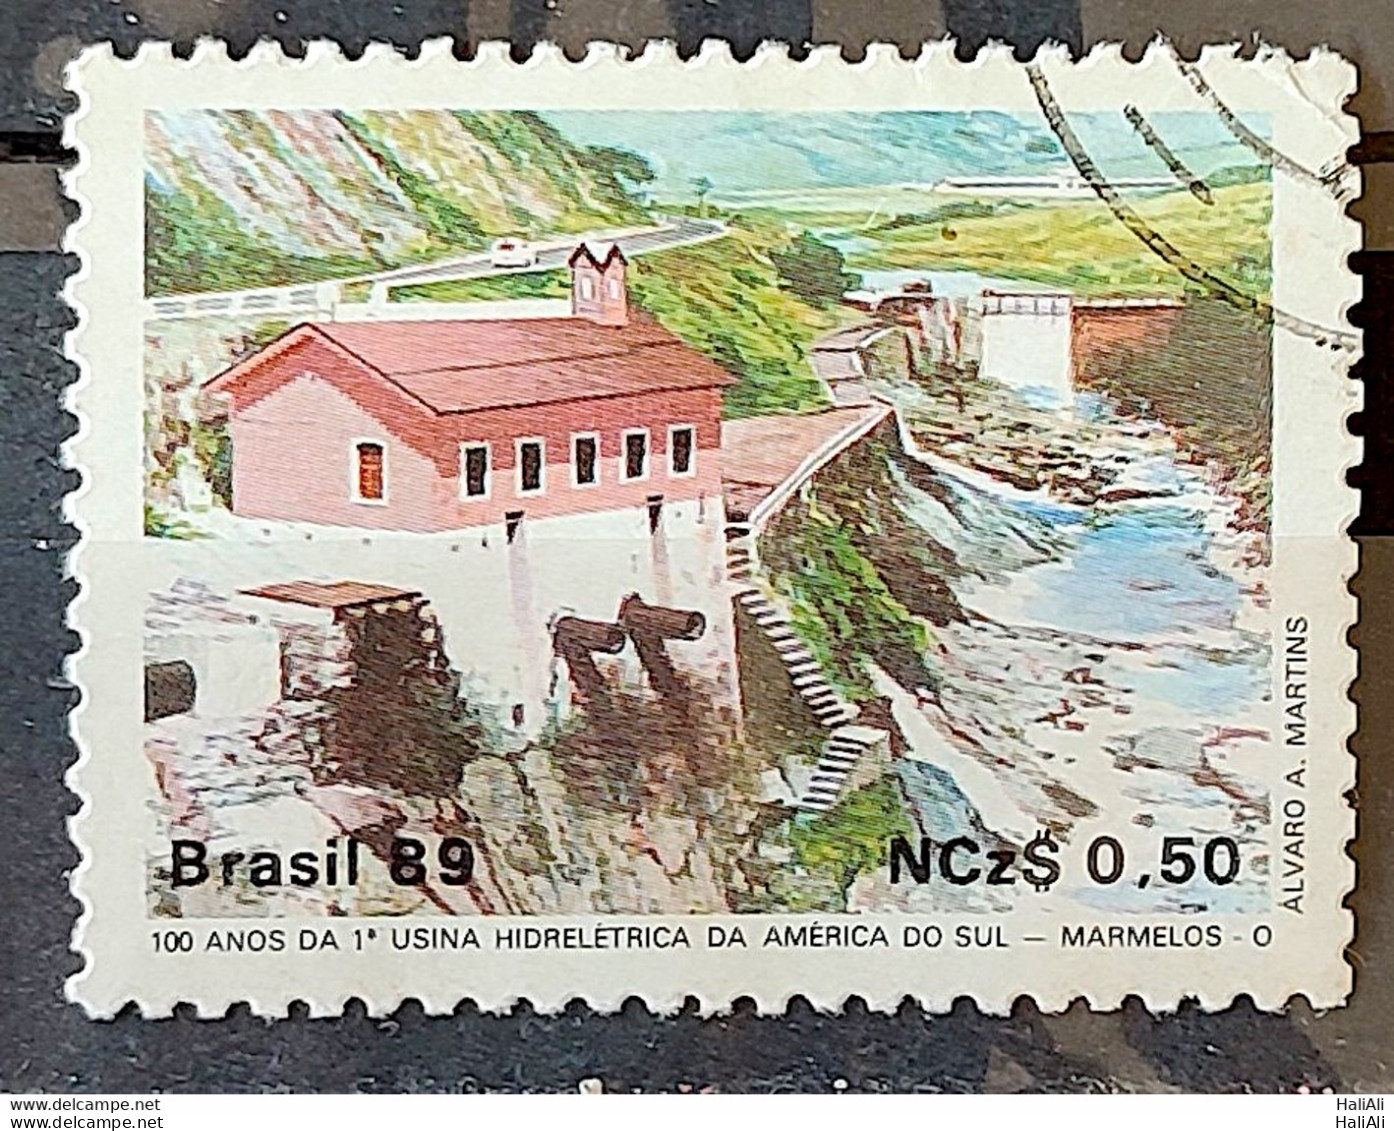 C 1644 Brazil Stamp 100 Years Hydroelectric Marmelos Energy Electricity Juiz De Fora 1989 Circulated 14 - Used Stamps